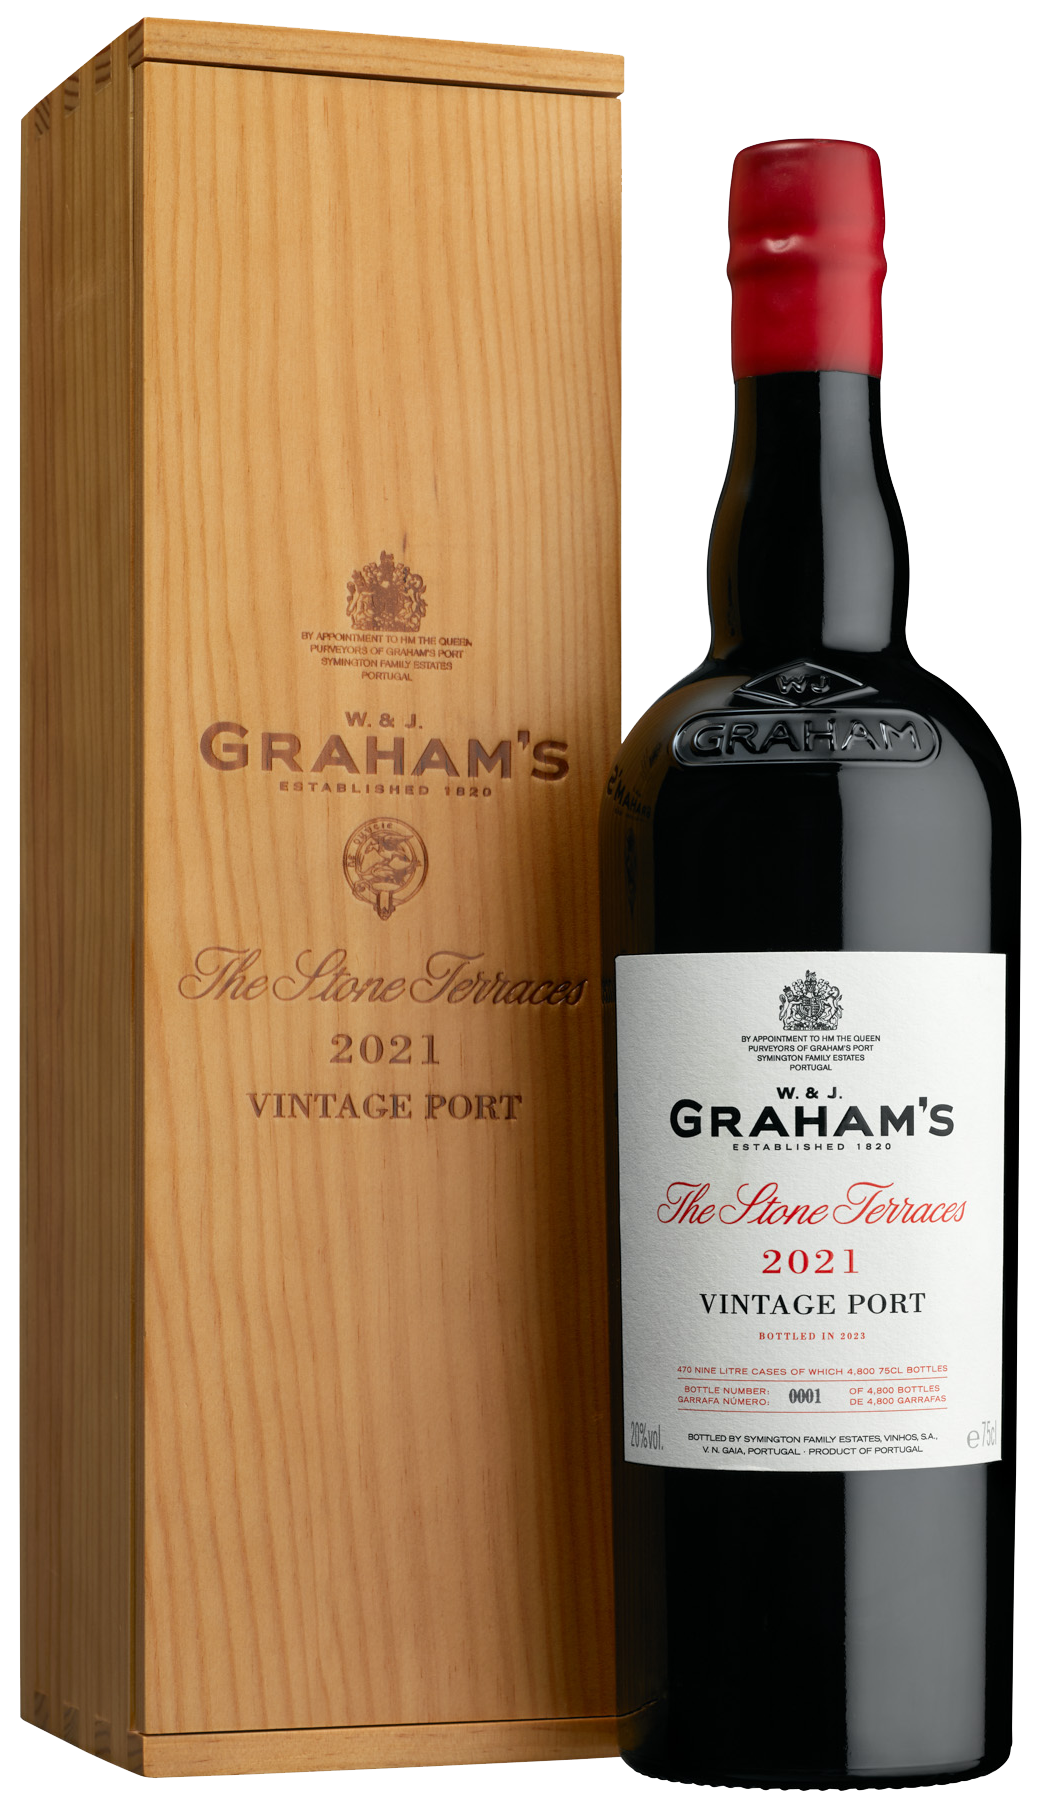 Product Image for GRAHAM'S "THE STONE TERRACES" VINTAGE PORT 2021